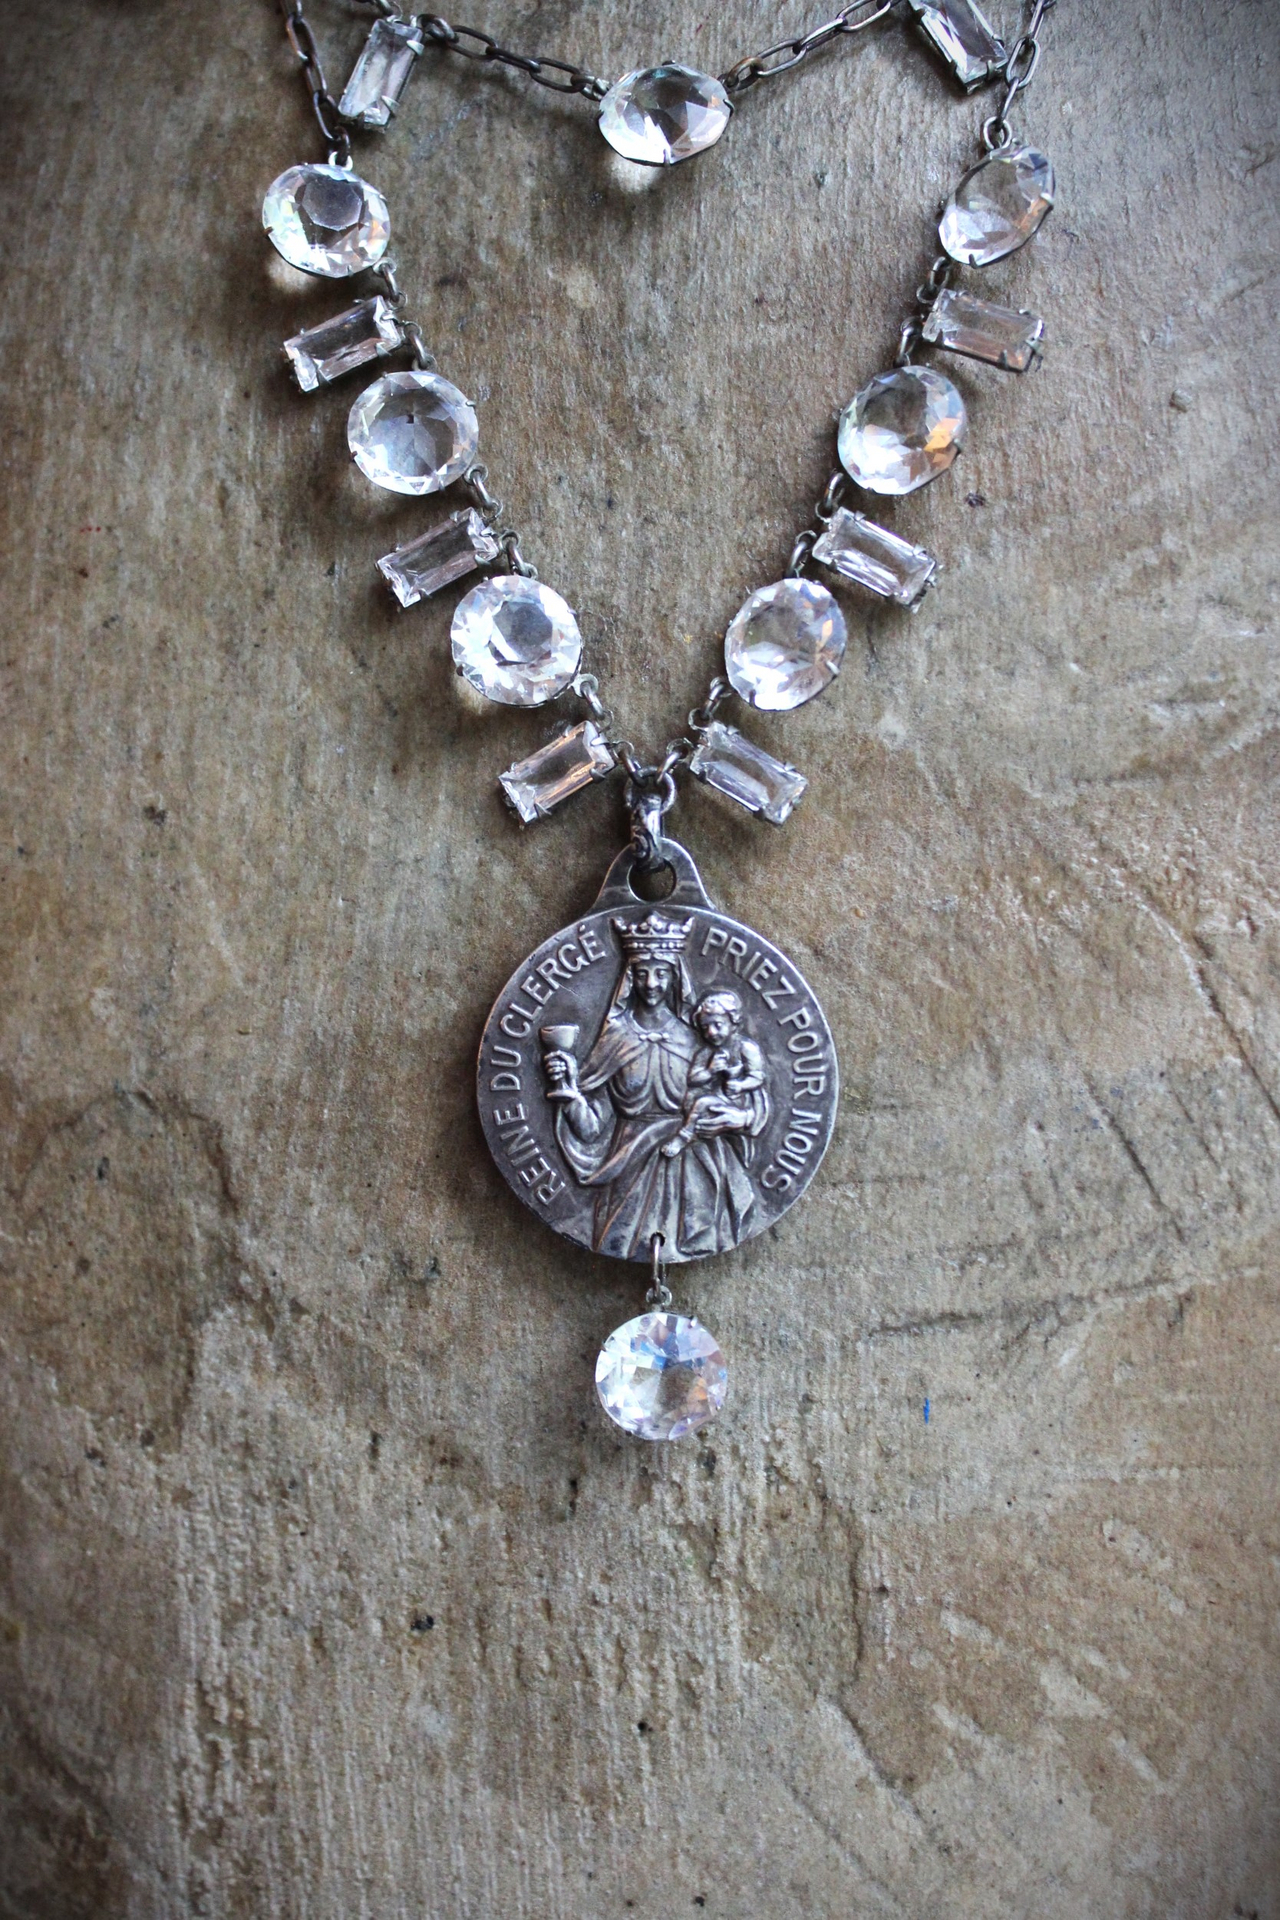 Rare Antique French Reine du Clerge & Saint Tarcisius Medal and Faceted Rock Crystal Chain Necklace Set